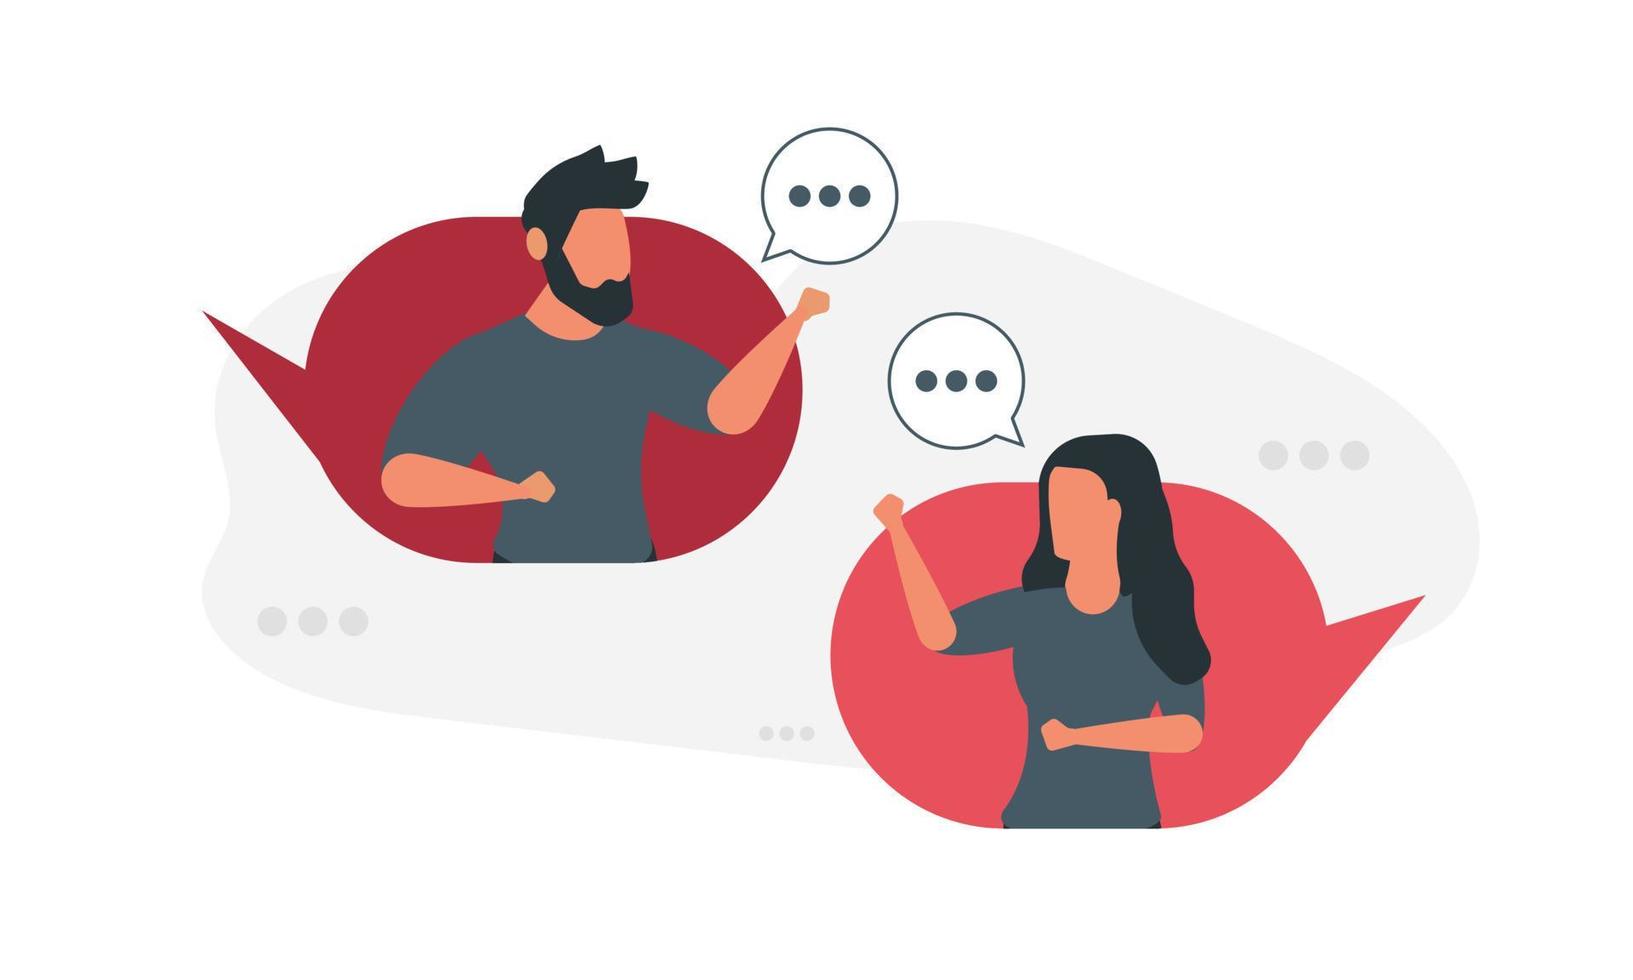 A conversation between two people, a man and a woman. Social media concept vector illustration